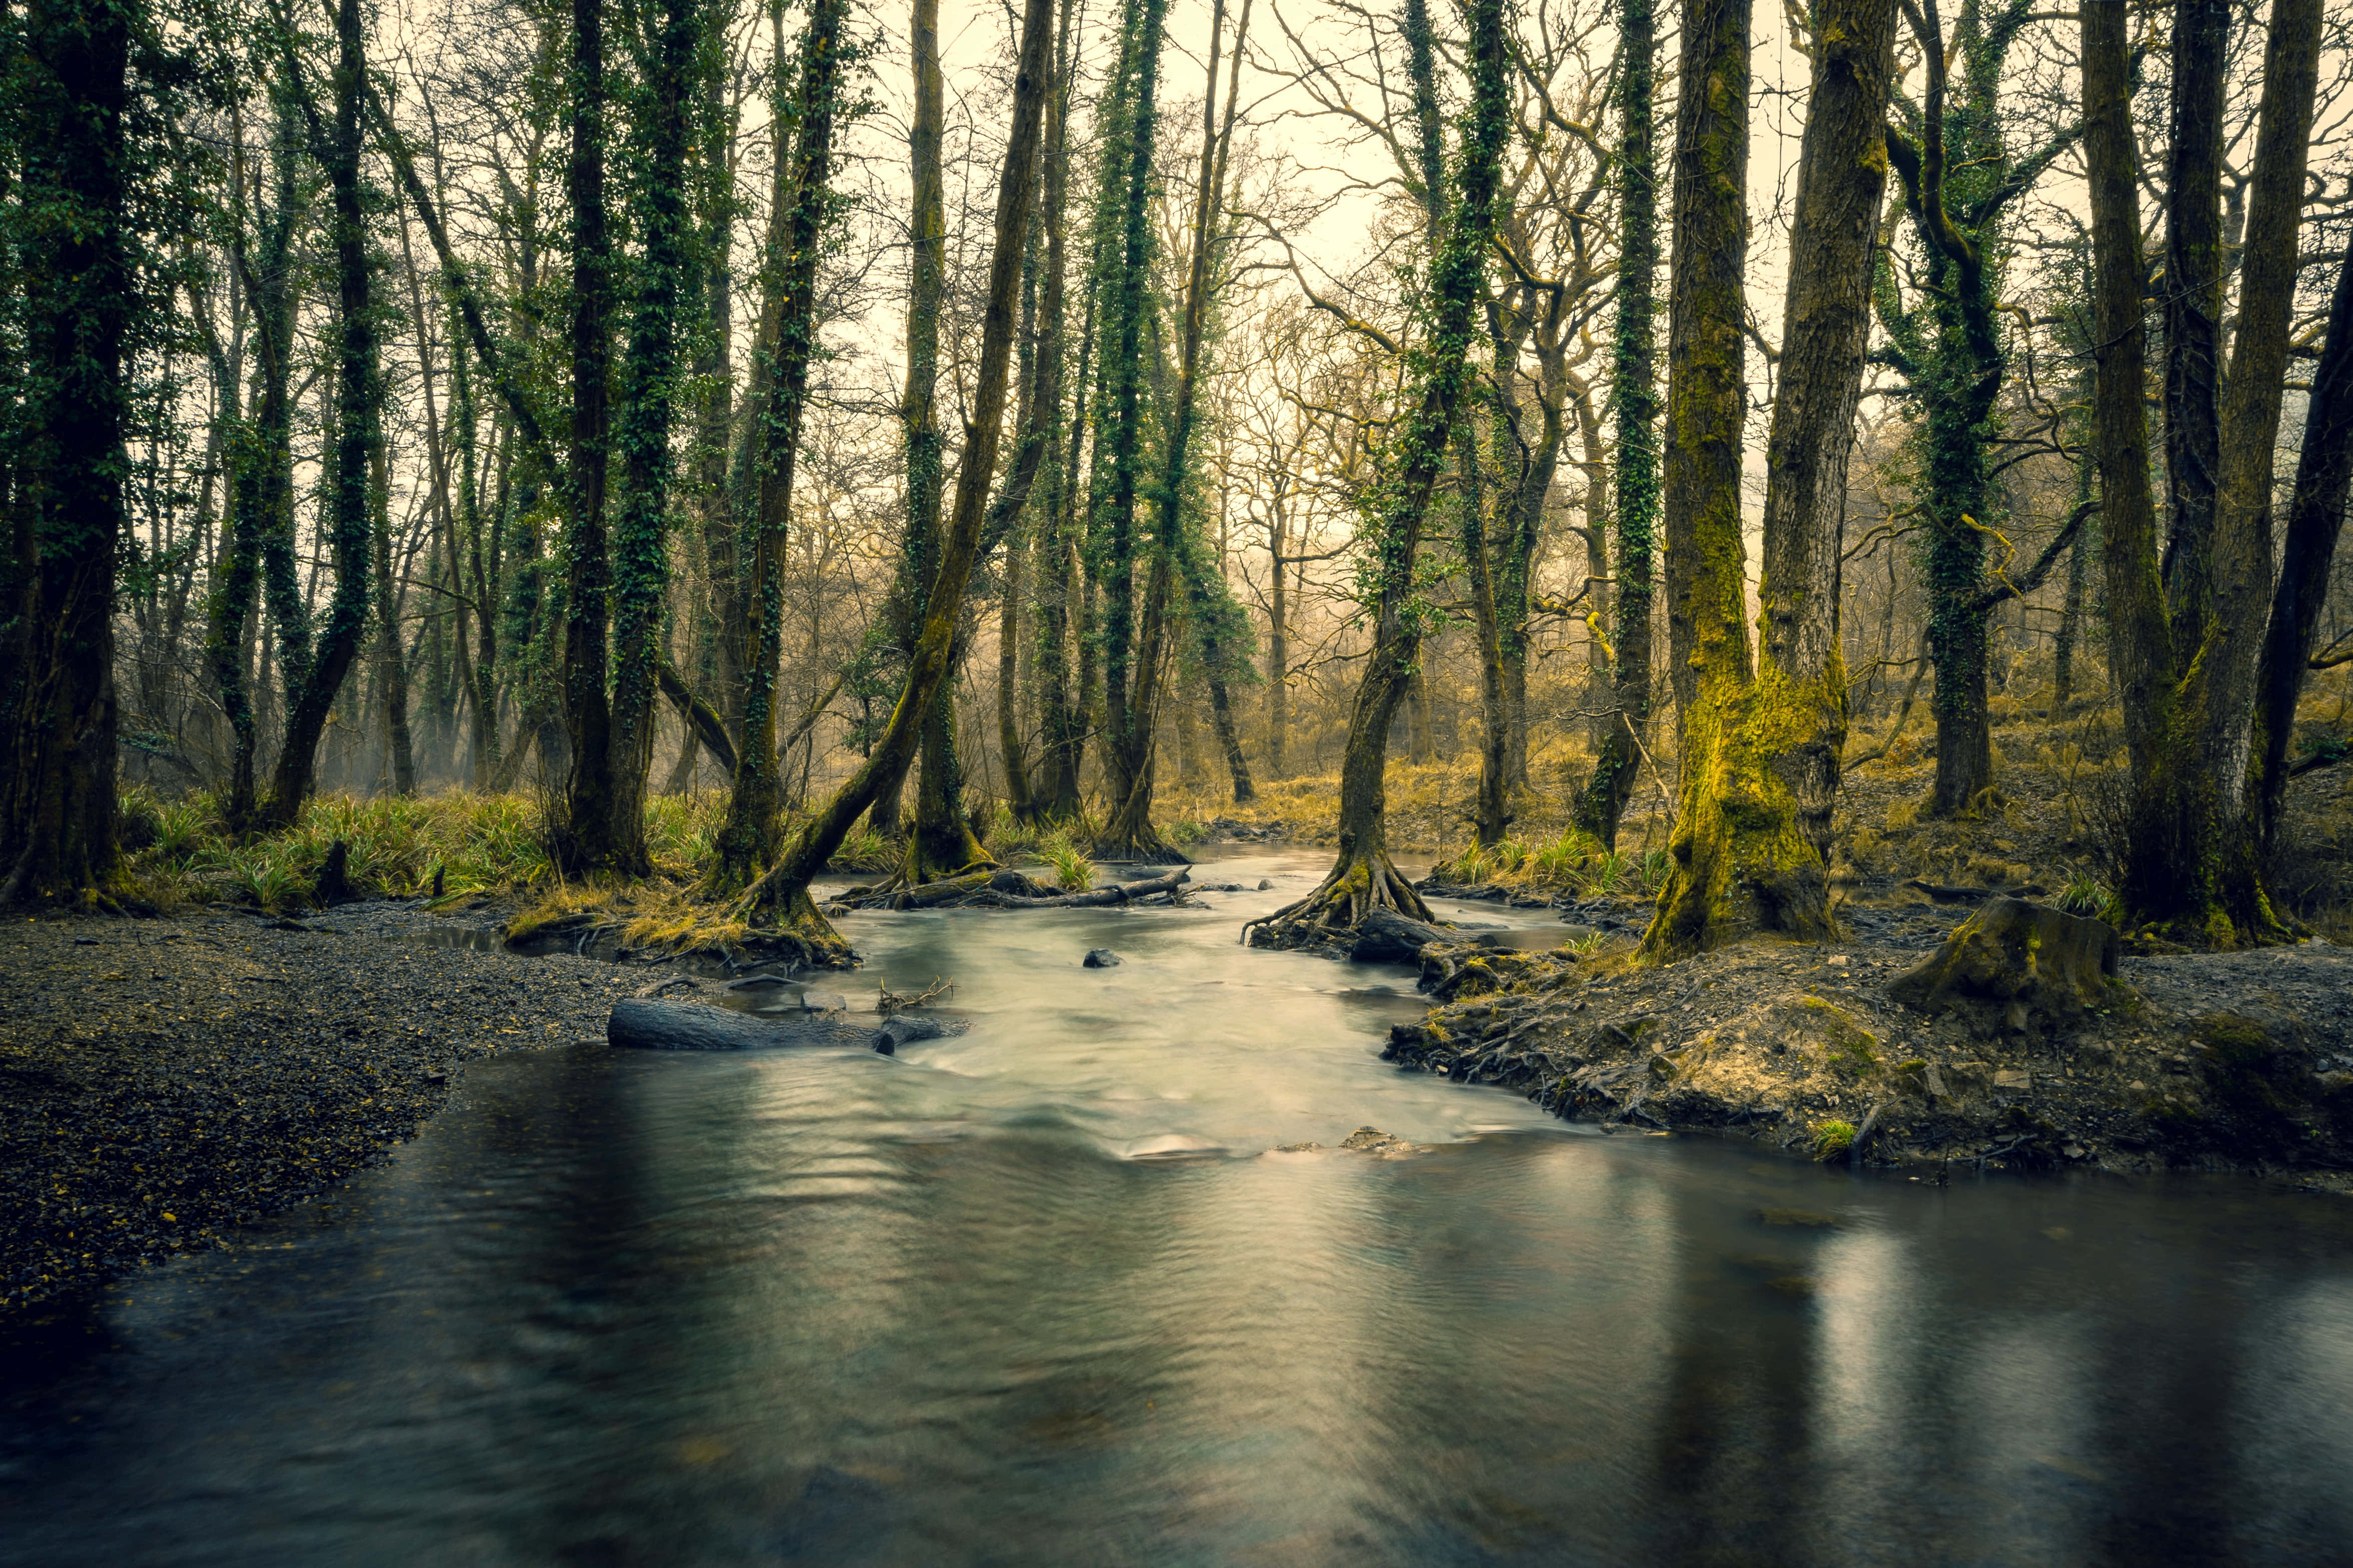 The Serenity Of A River Flowing Passes Through Majestic Landscapes - 4k Resolution Wallpaper